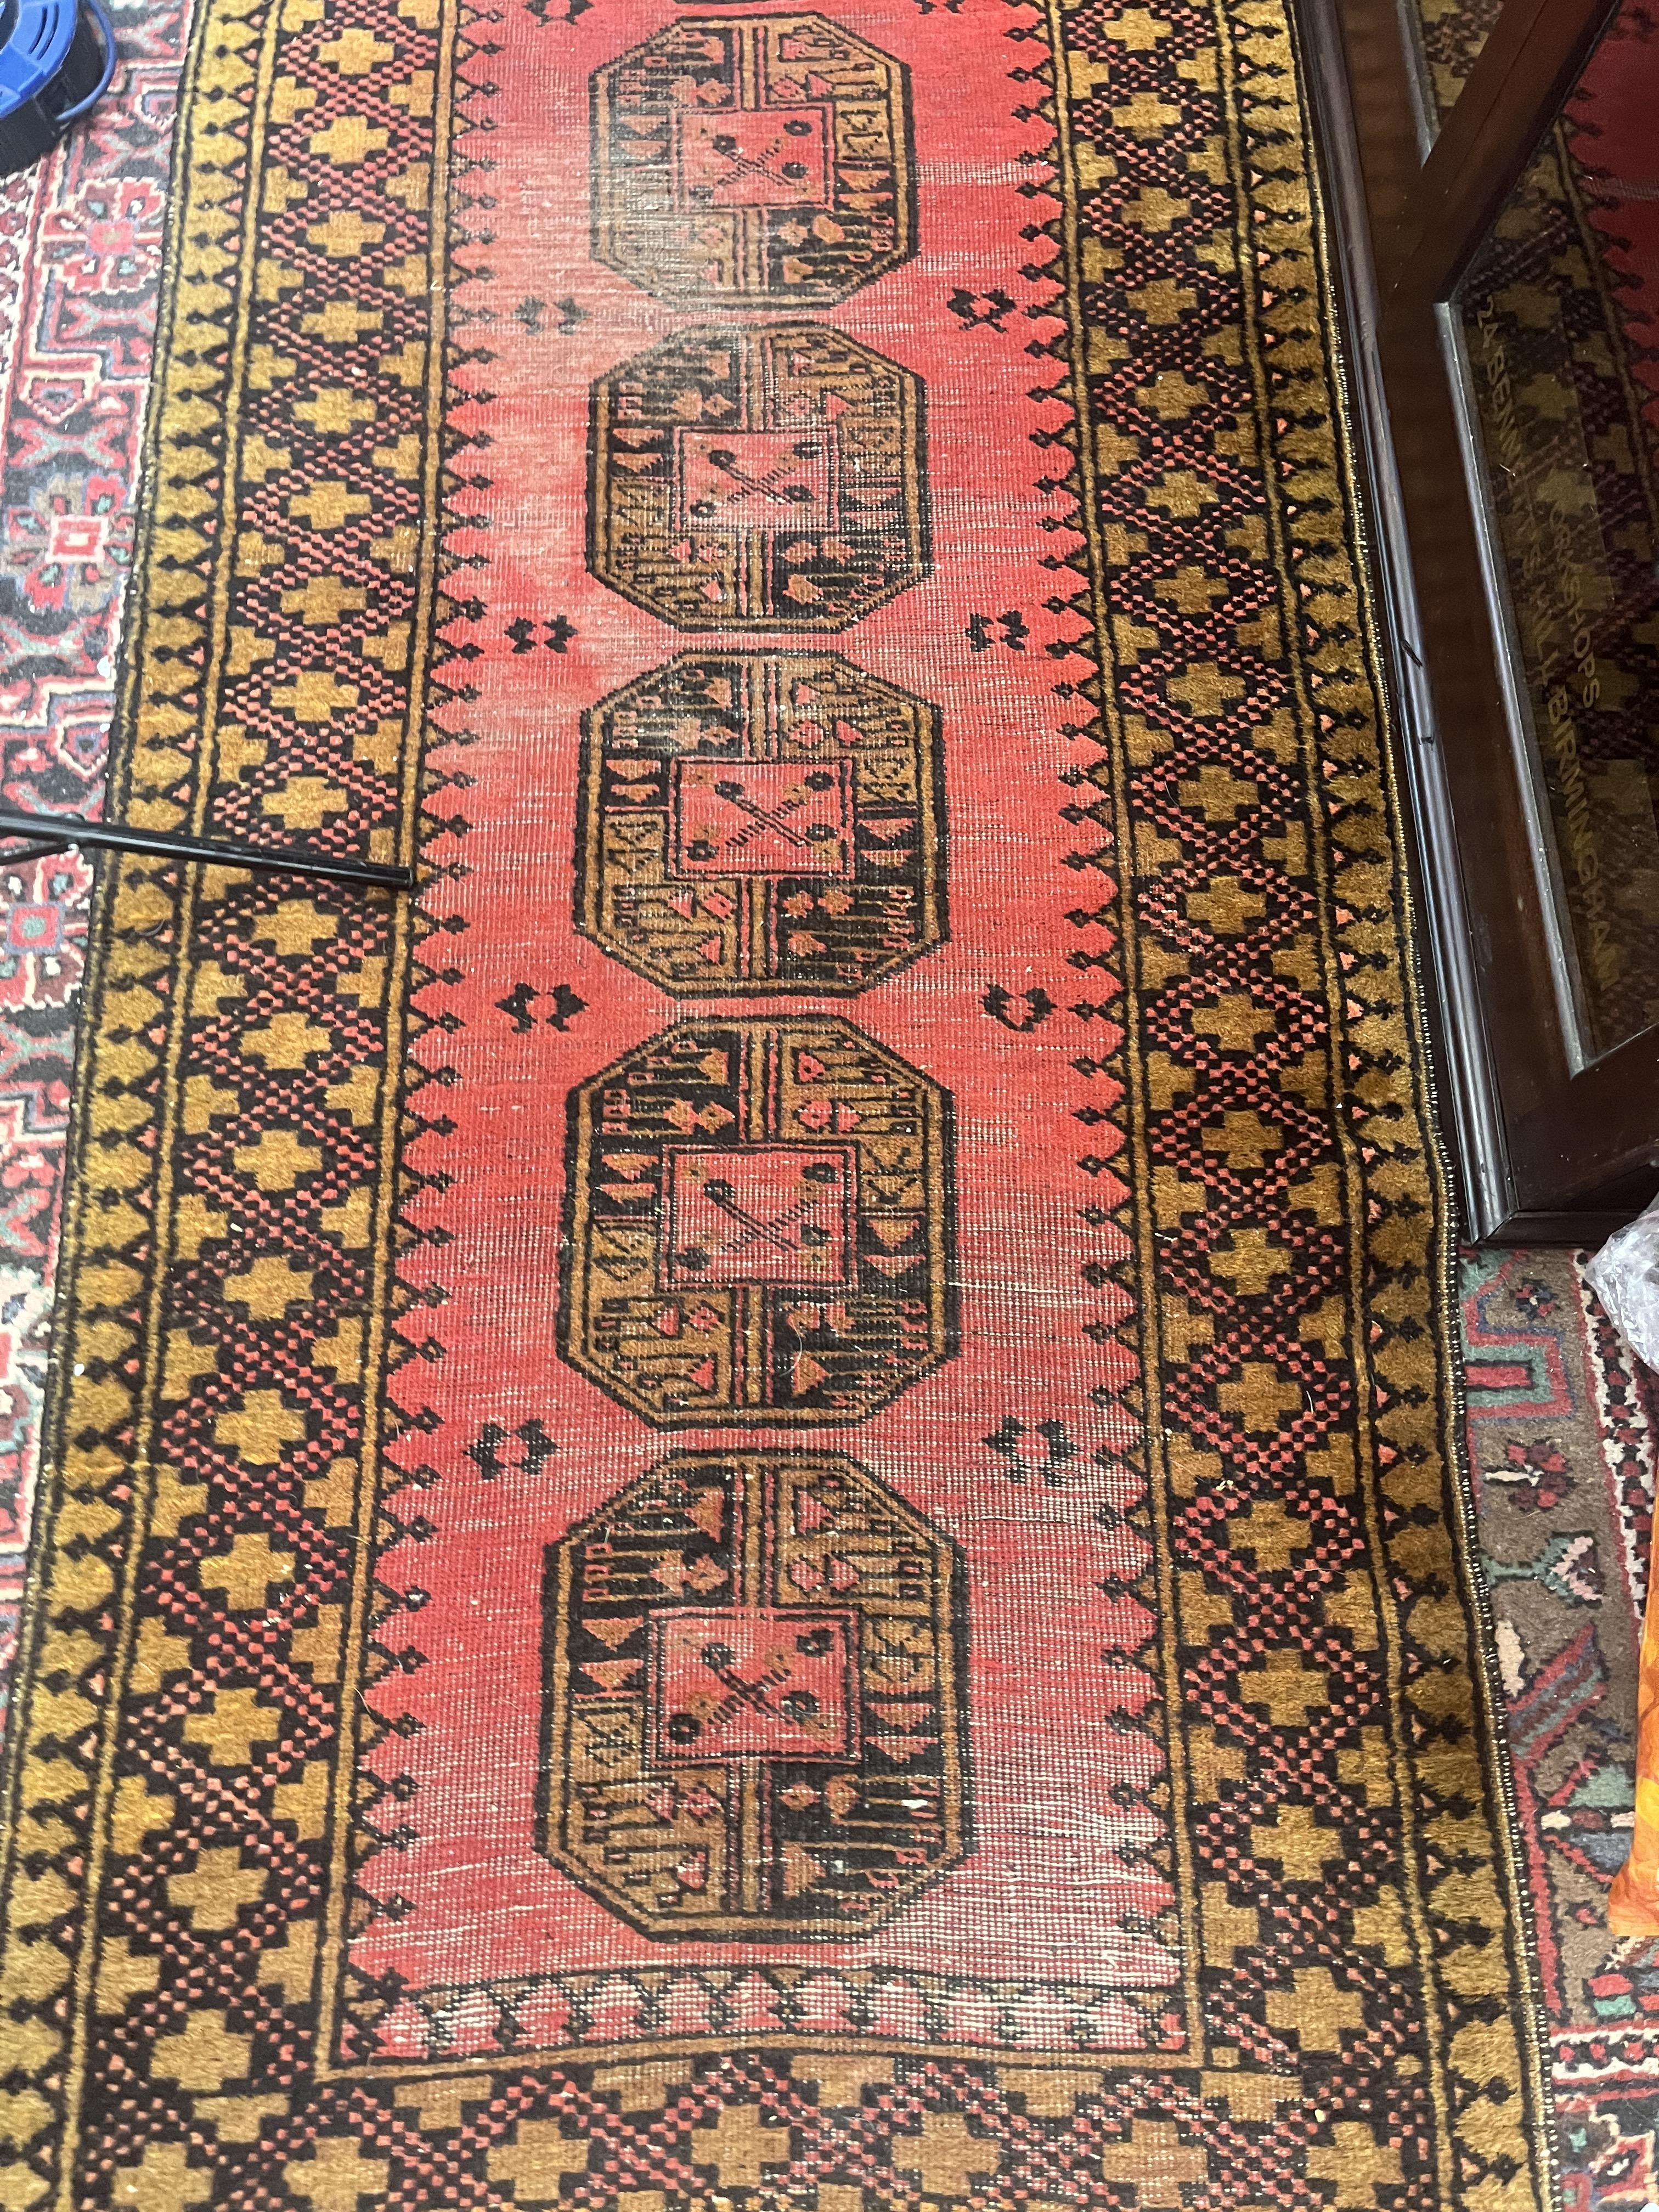 Large red patterned runner - Approx size: 300cm x 89cm - Image 4 of 4